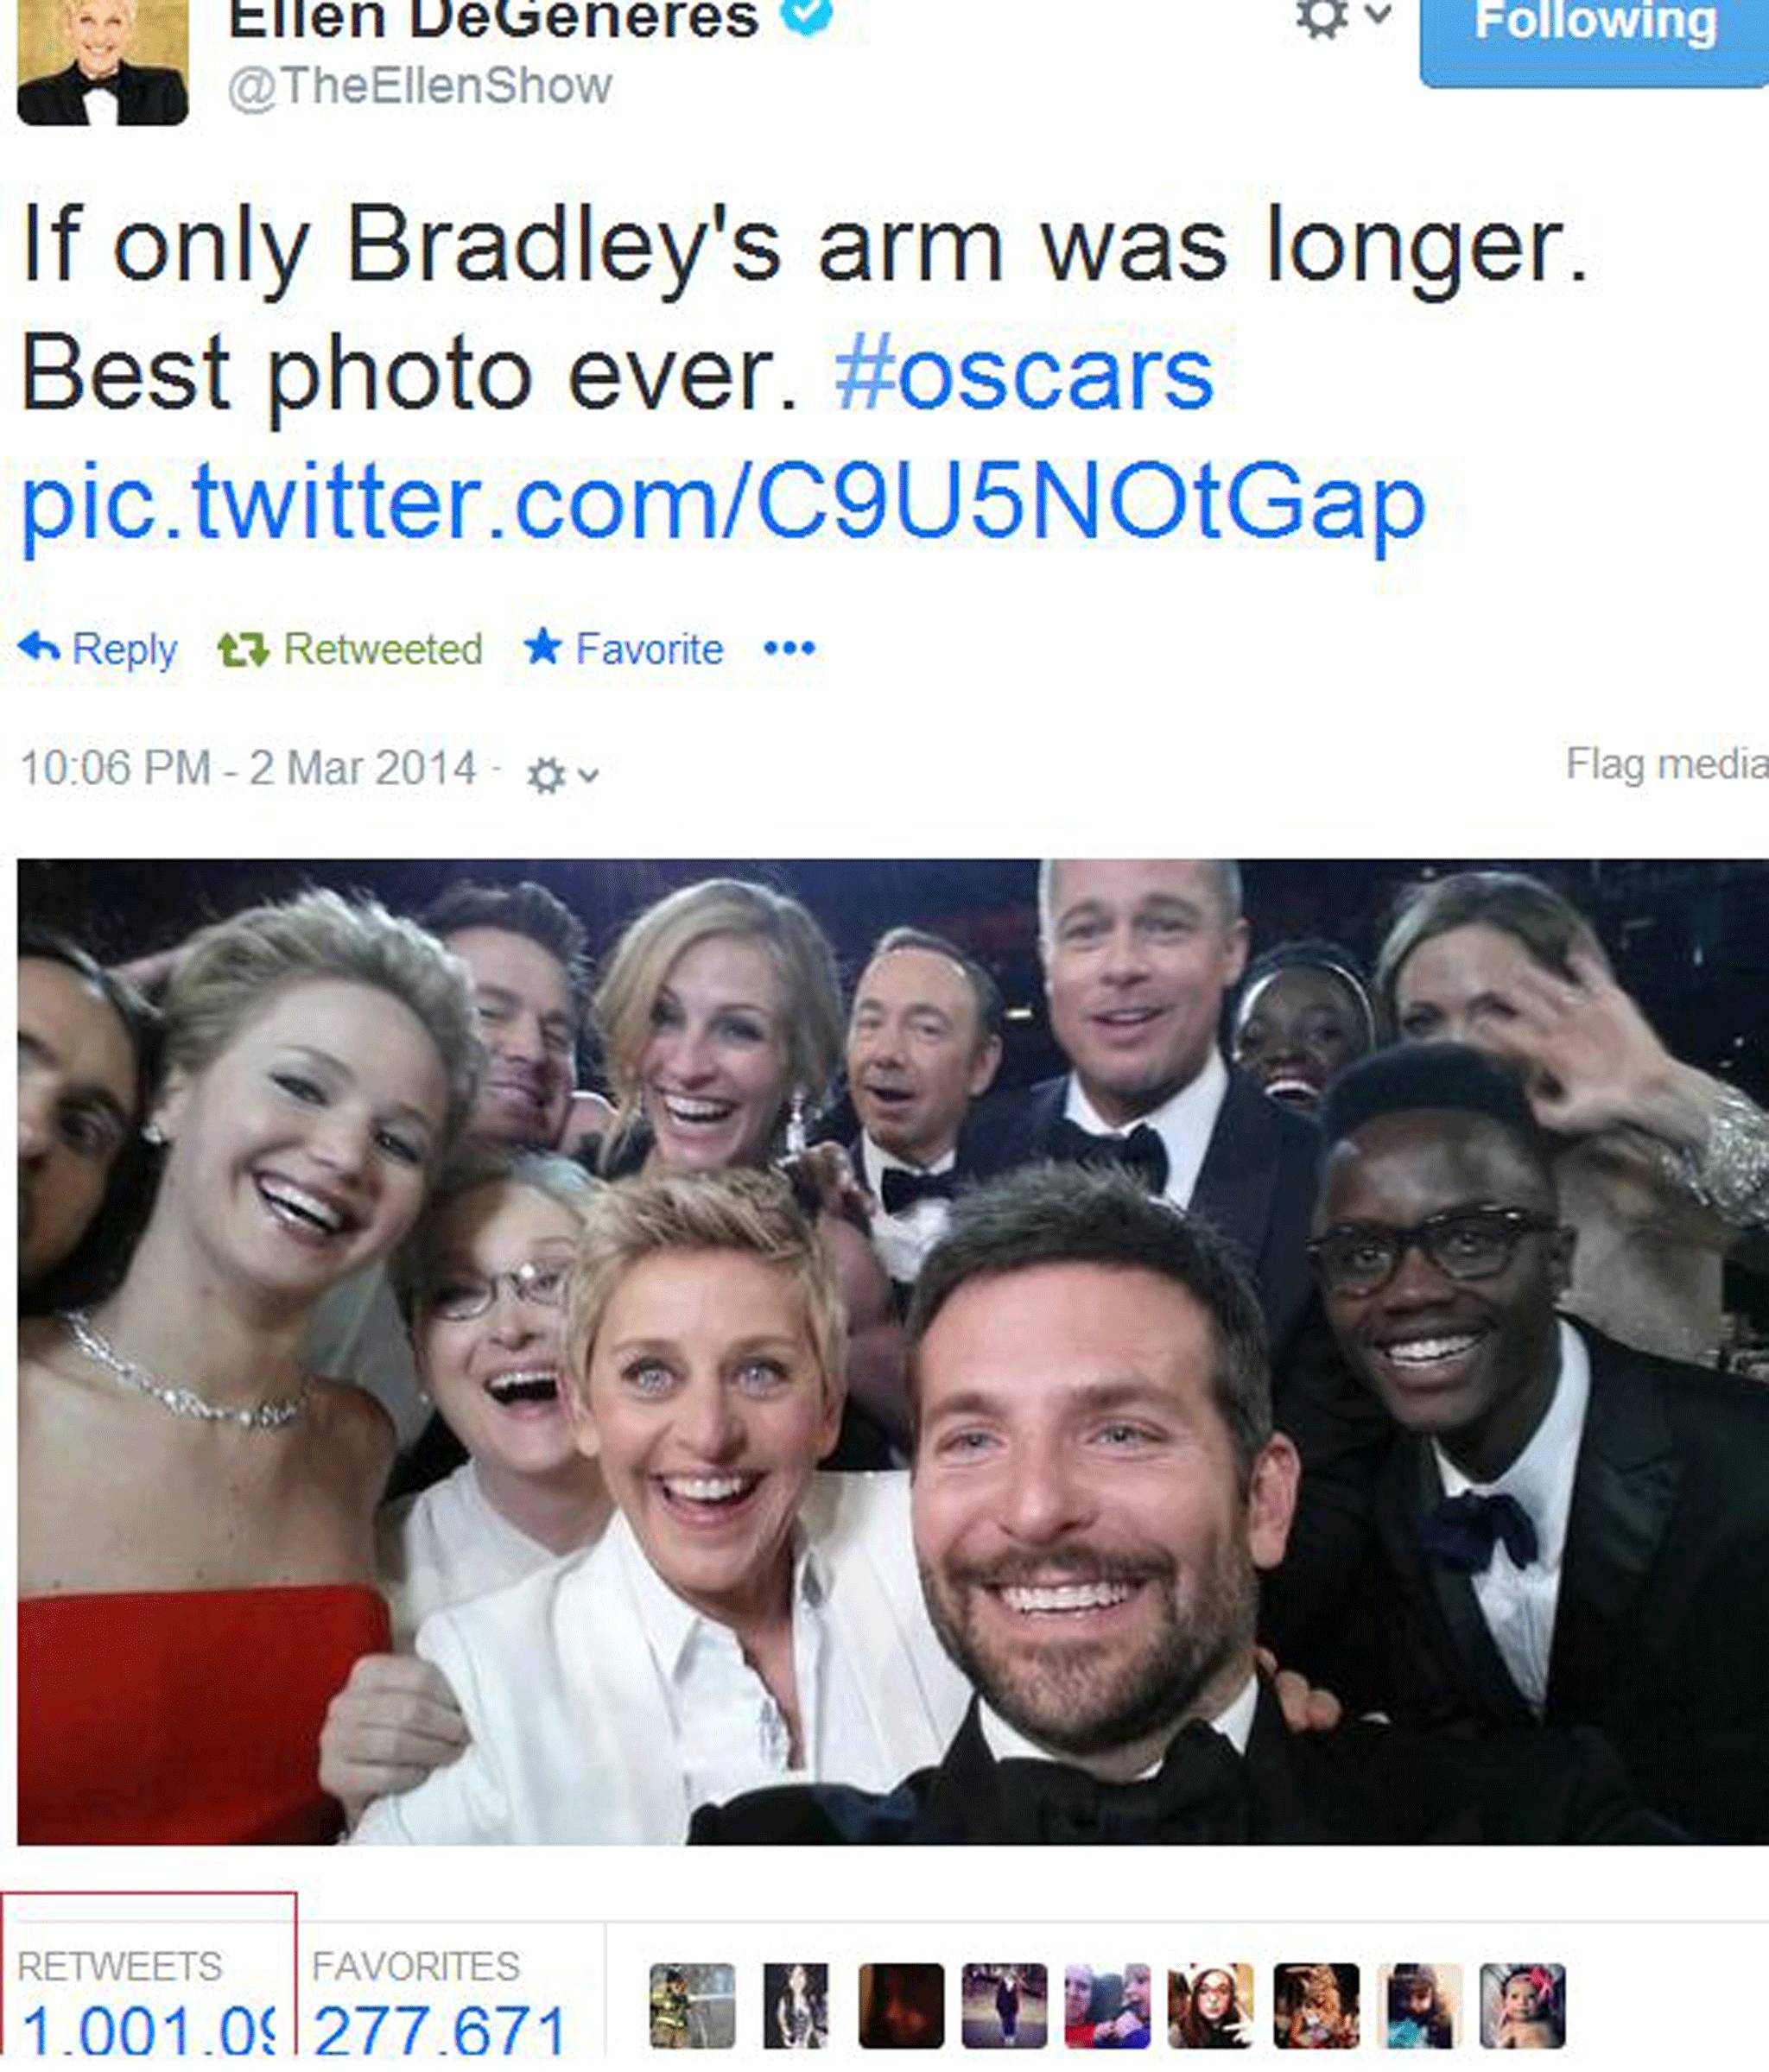 Ellen DeGeneres takes Oscars 'selfie' with every A-lister in existence and  breaks Twitter record, The Independent